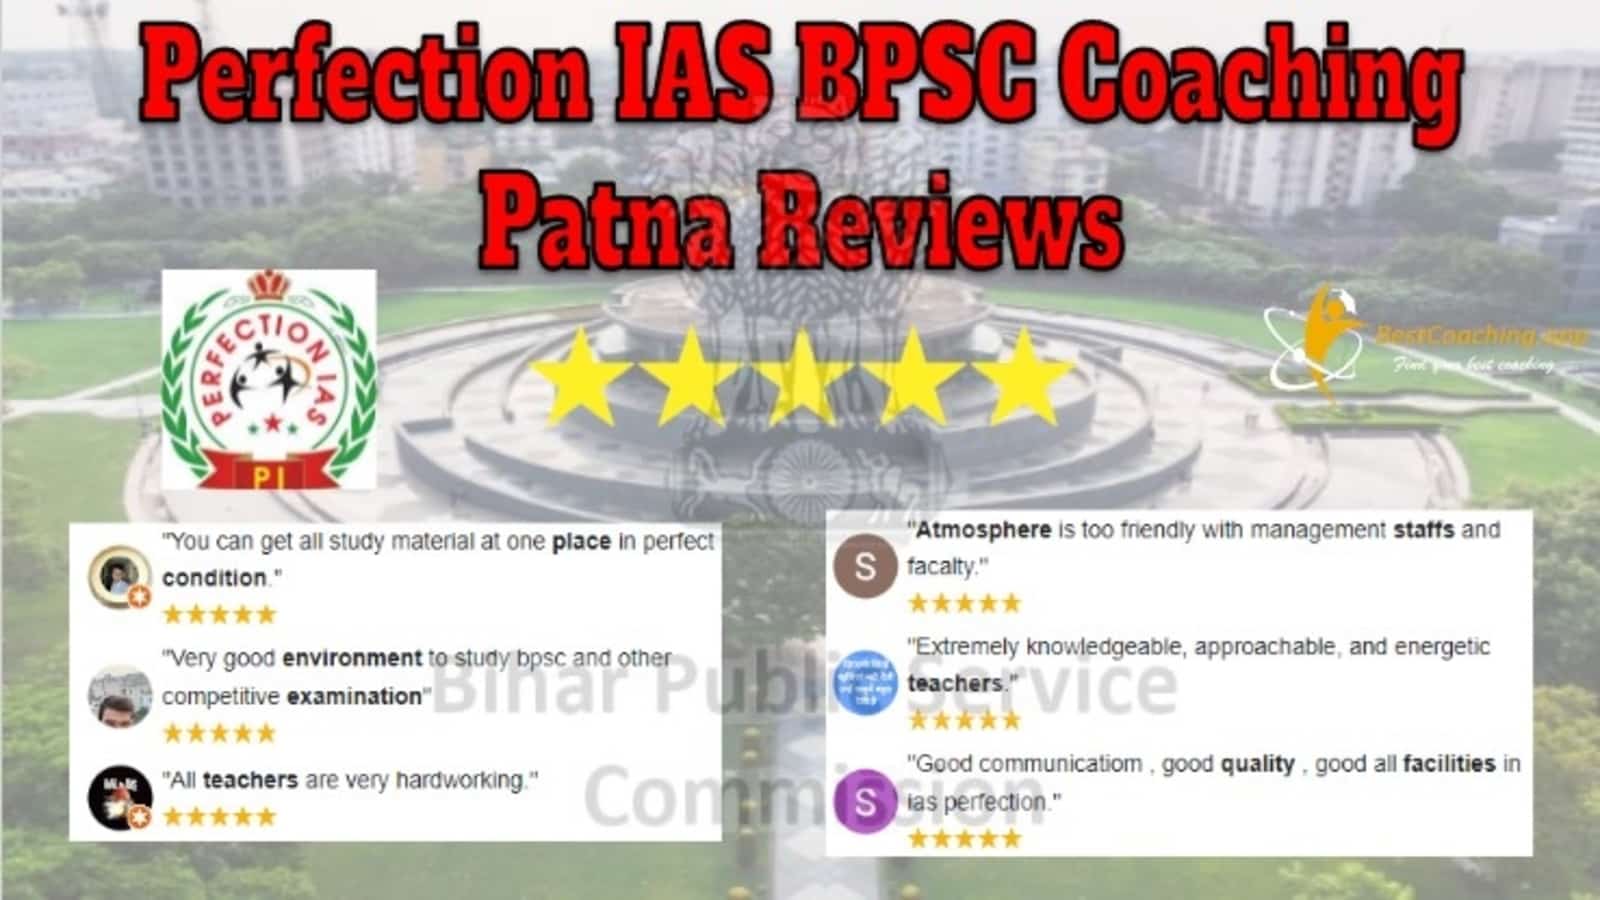 Perfection IAS BPSC Coaching in Patna Reviews